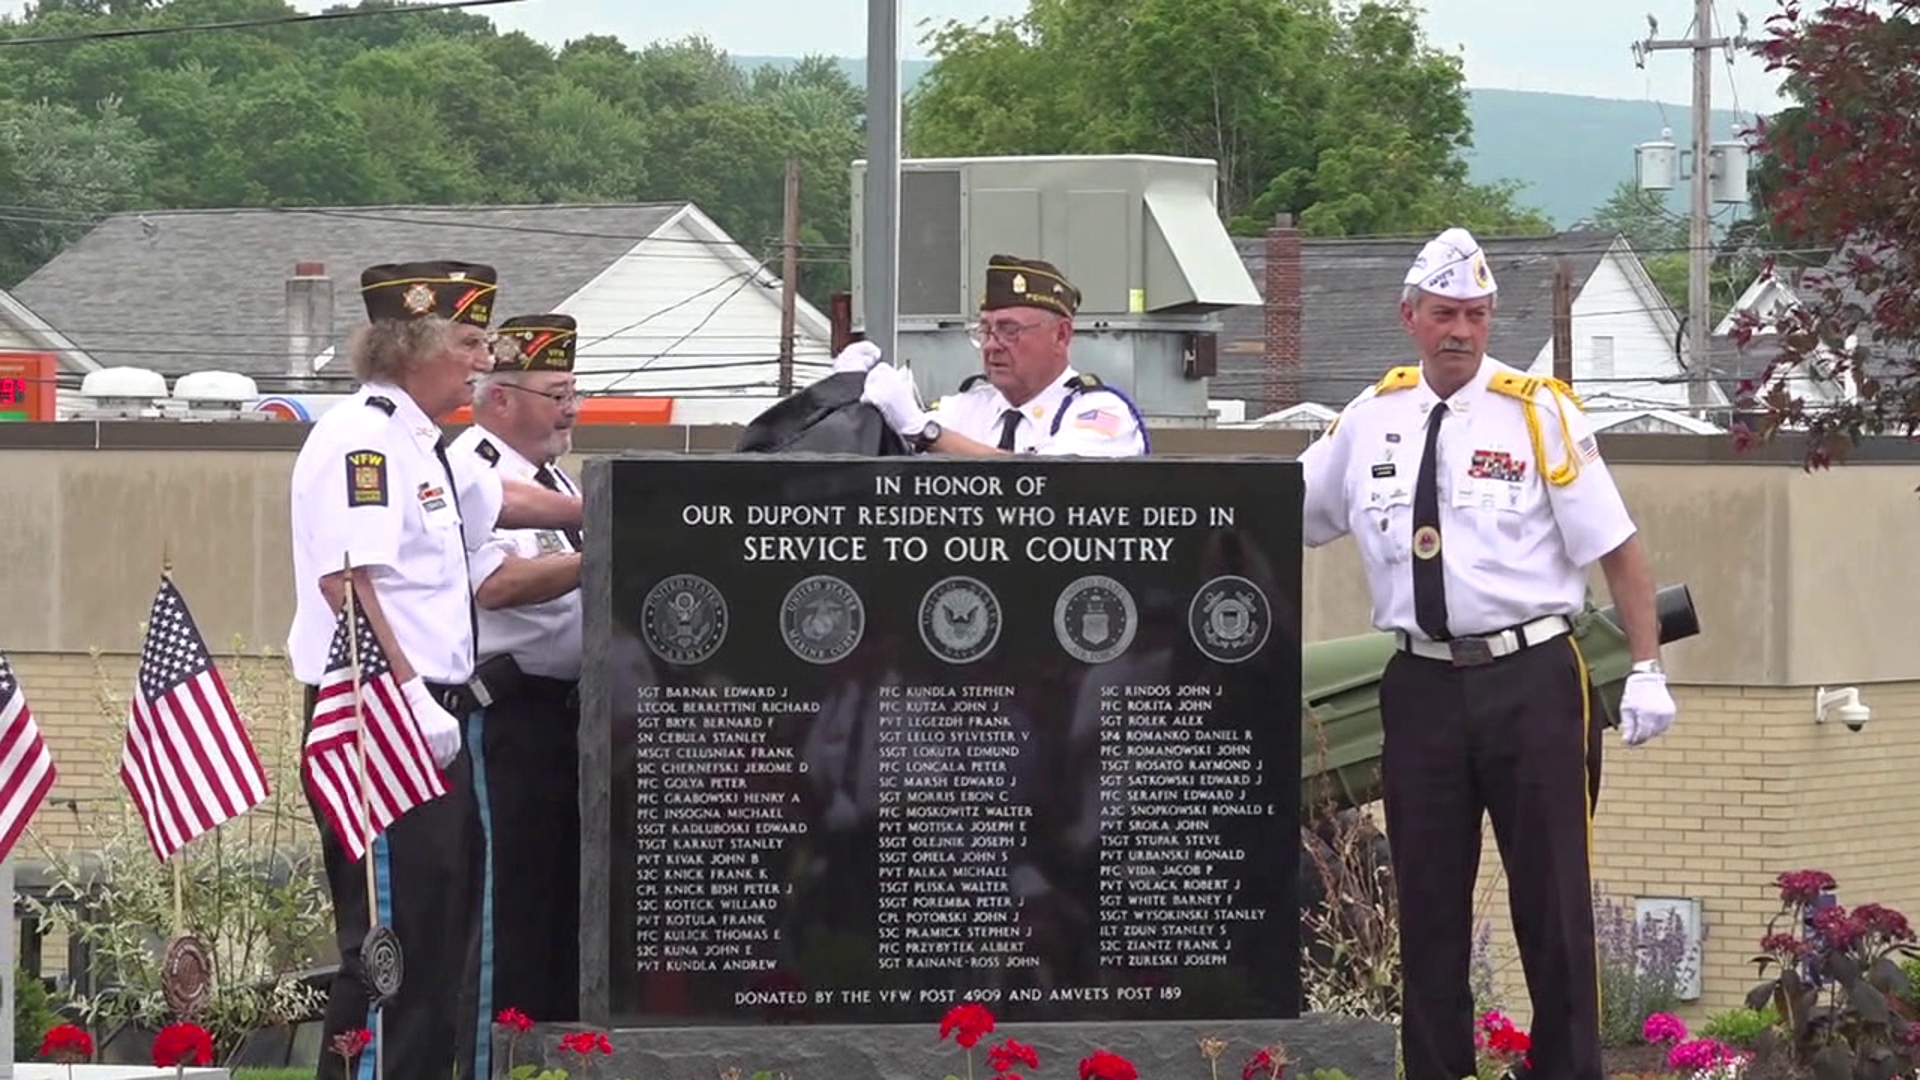 The fallen heroes were honored with a new monument at the borough building displaying each of their names.